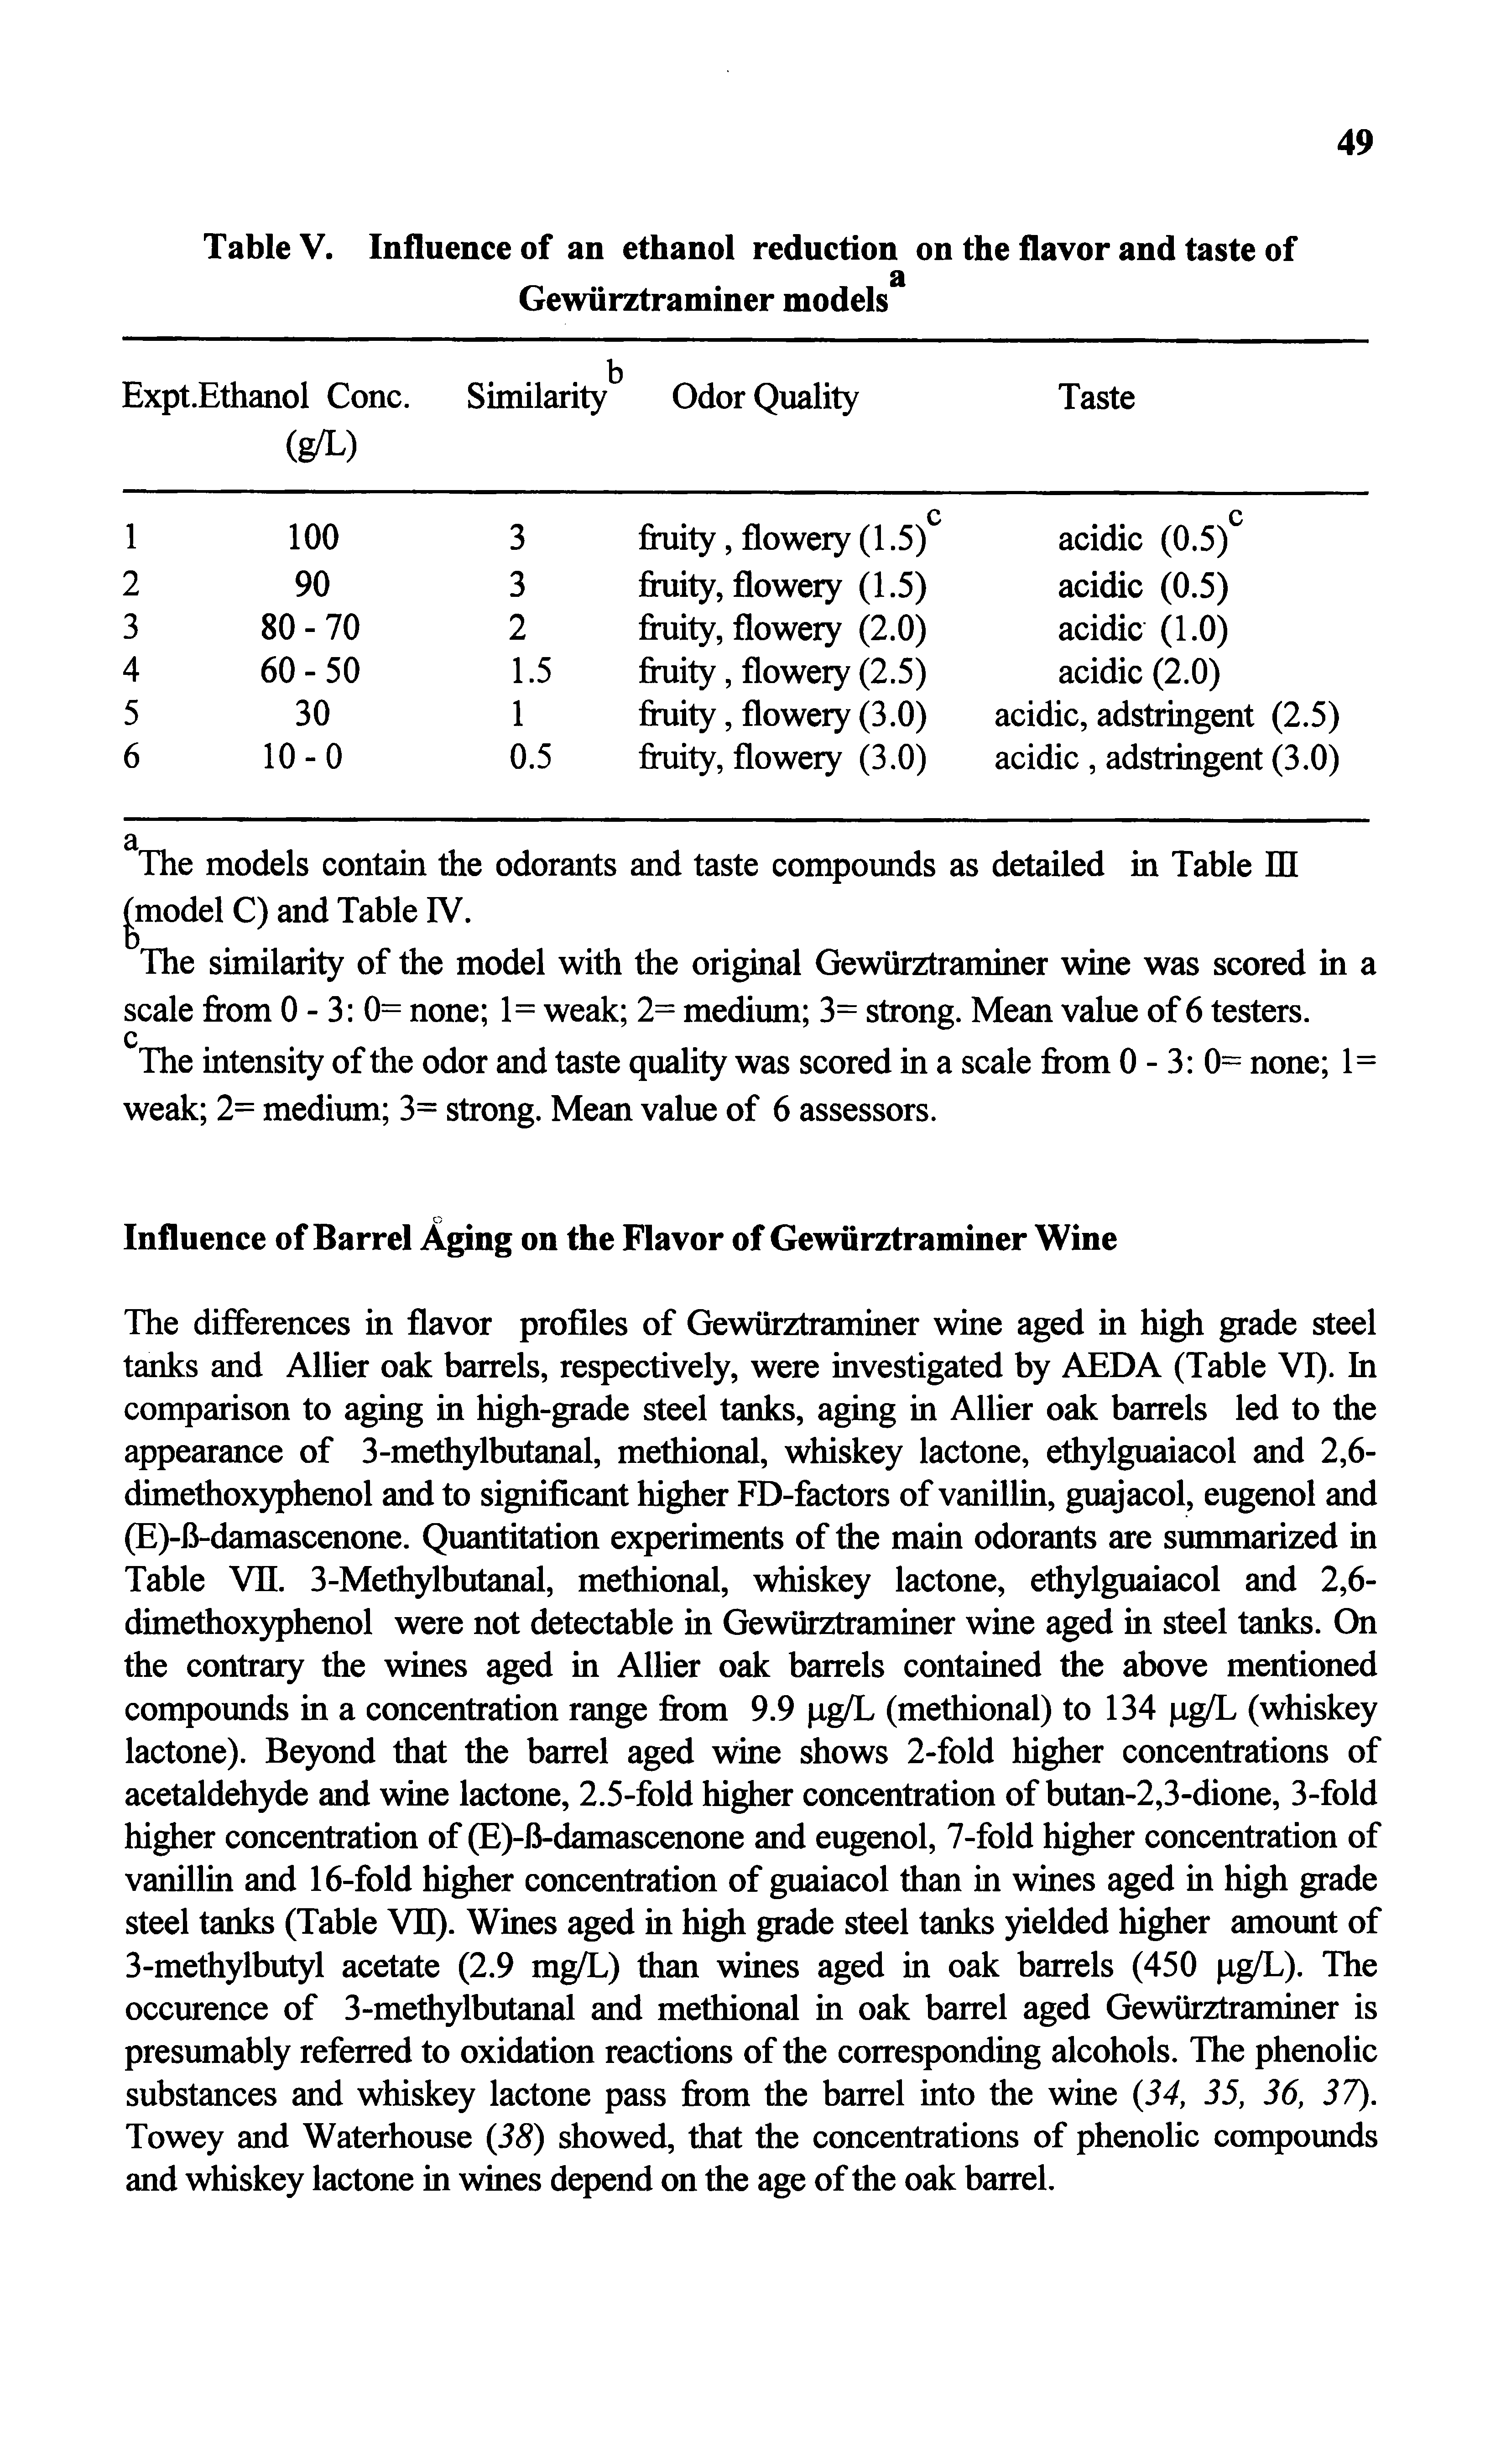 Table V. Influence of an ethanol reduction on the flavor and taste of Gewurztraniiner models ...